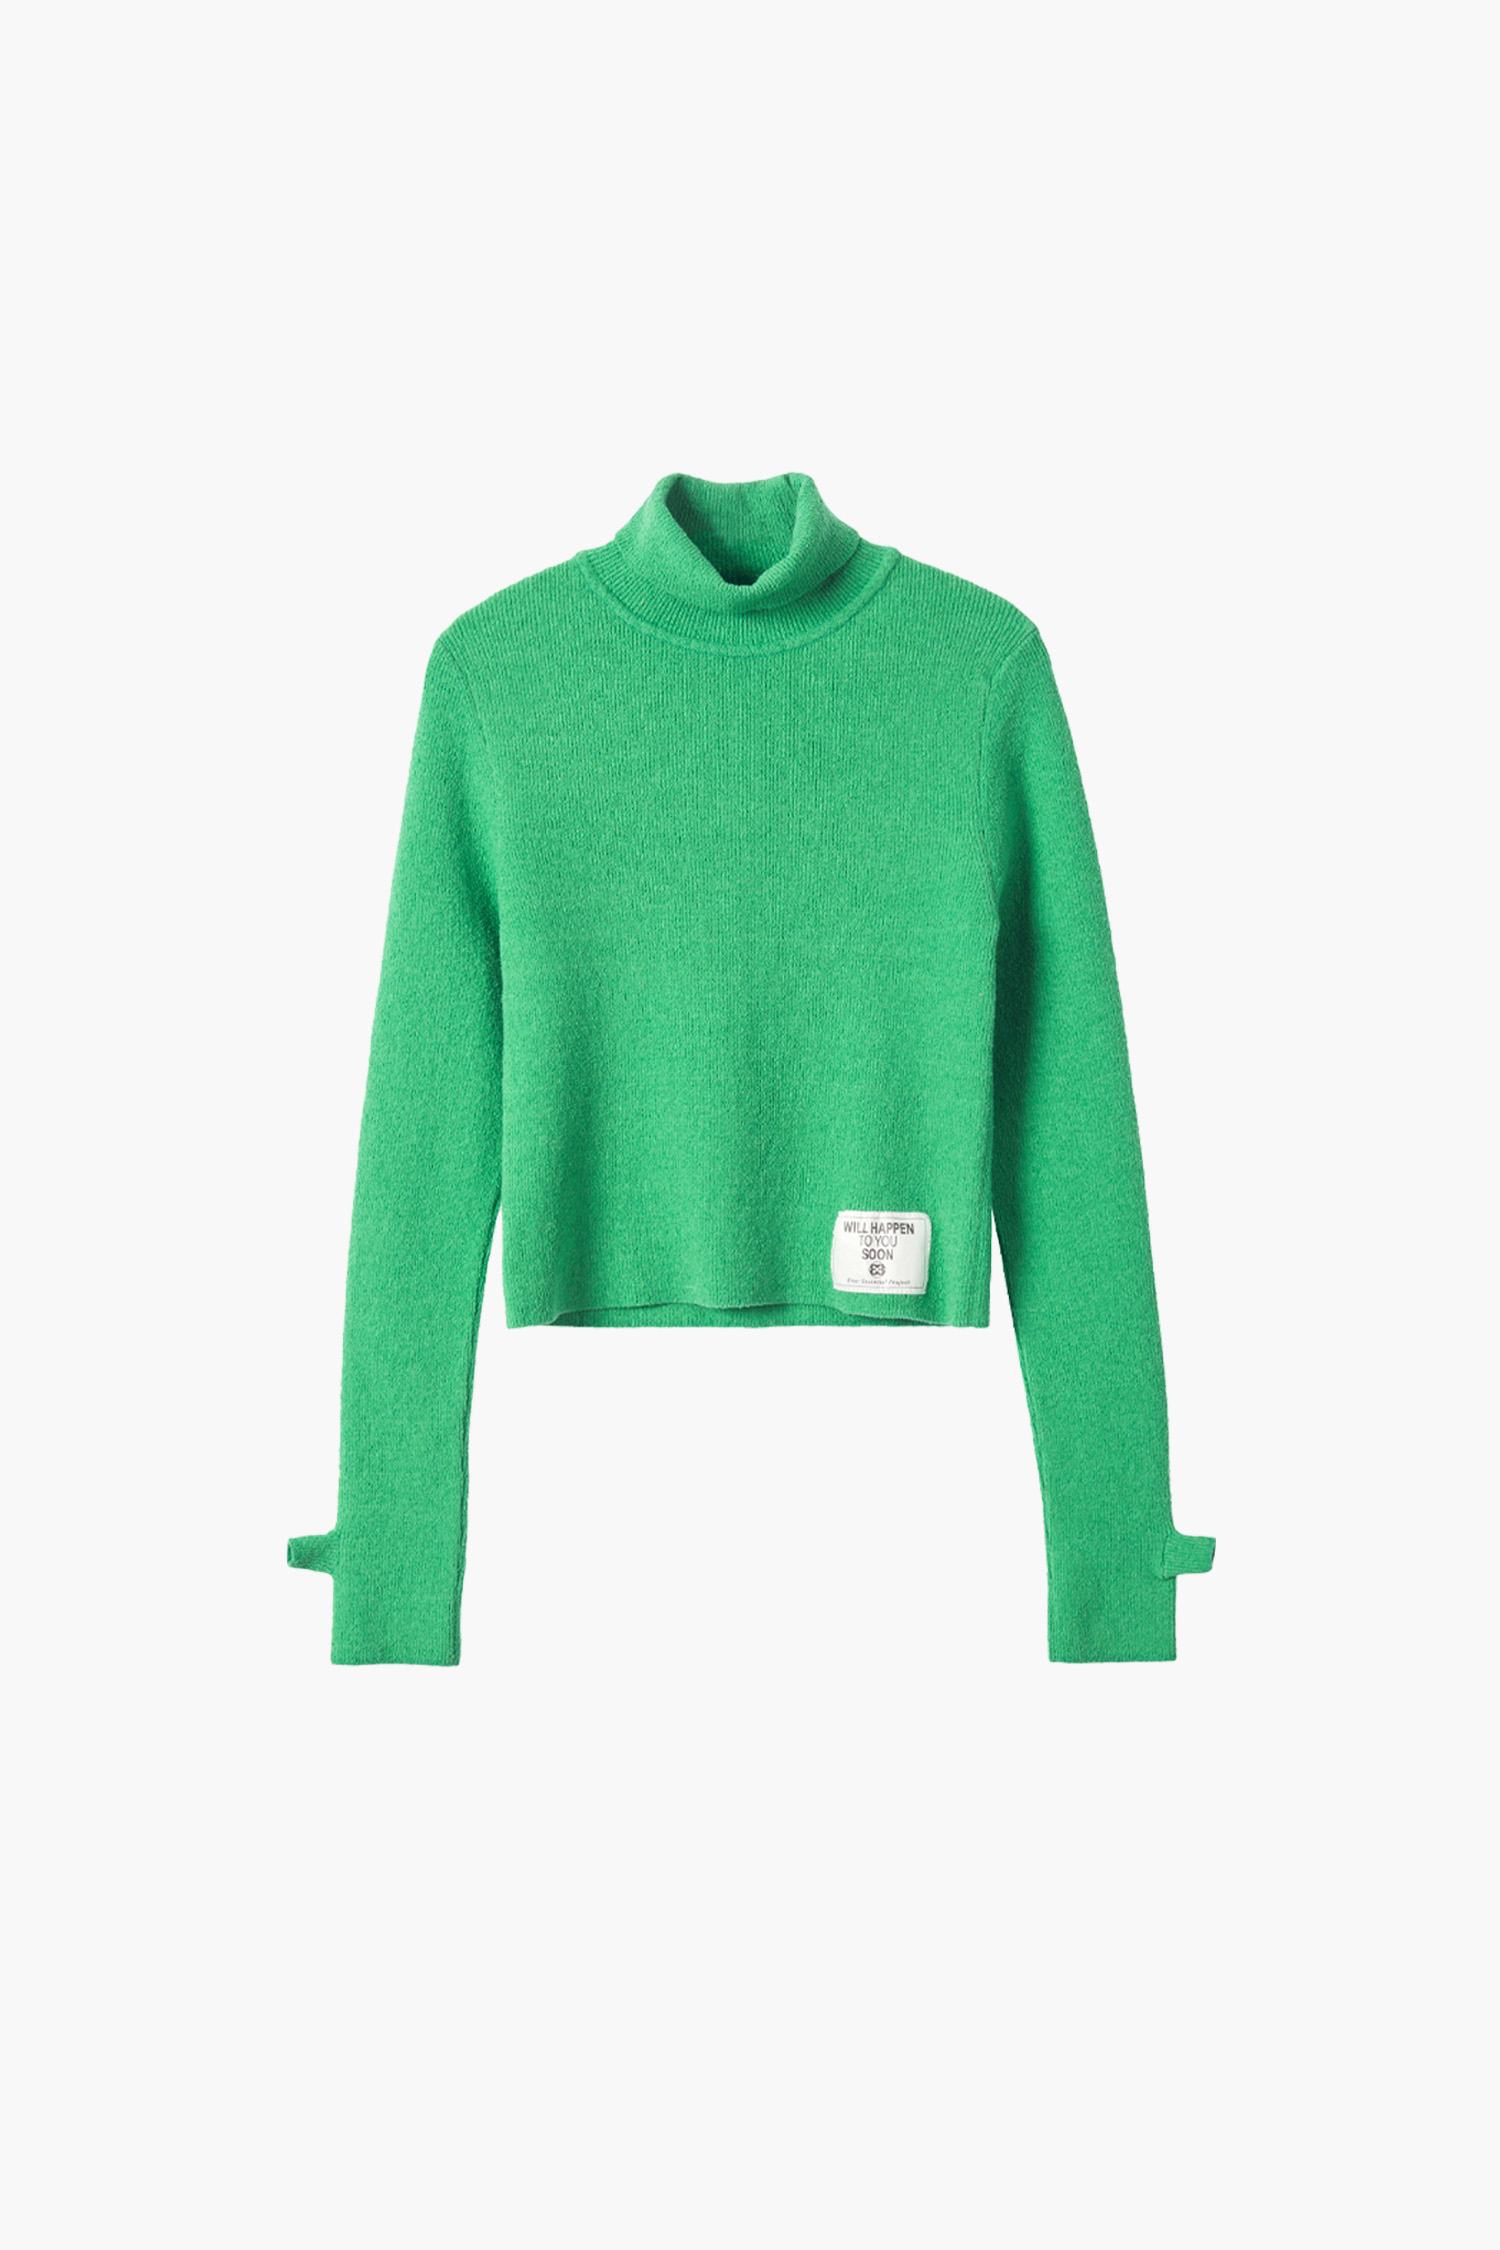 COTTON RIBBED LONG SLEEVE KNIT - GREEN